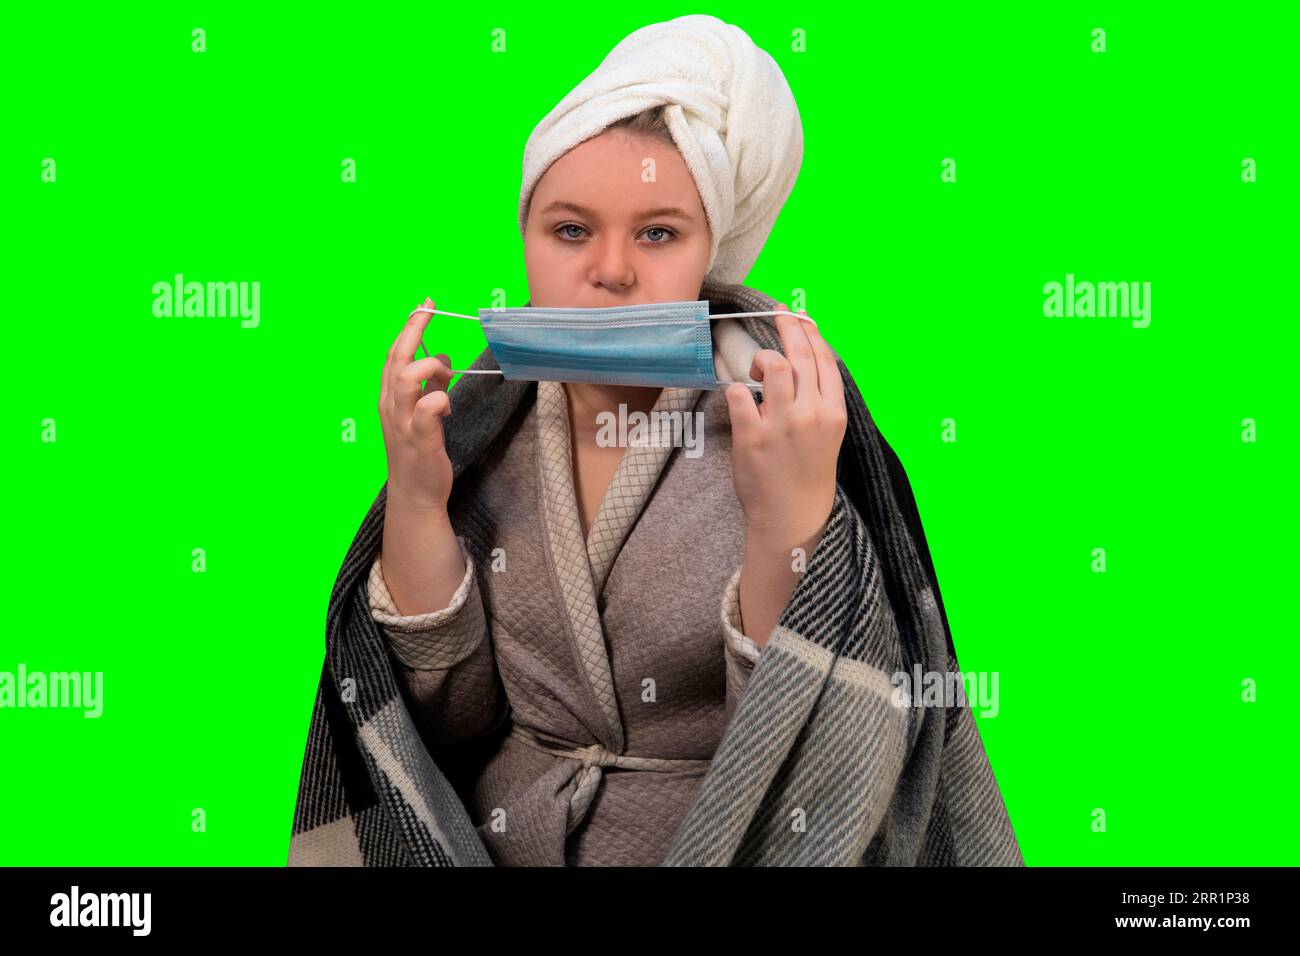 Girl with symptoms of cold puts on a protective medical mask on her face on a green background (chroma key). Concept of healthcare and home treatment Stock Photo